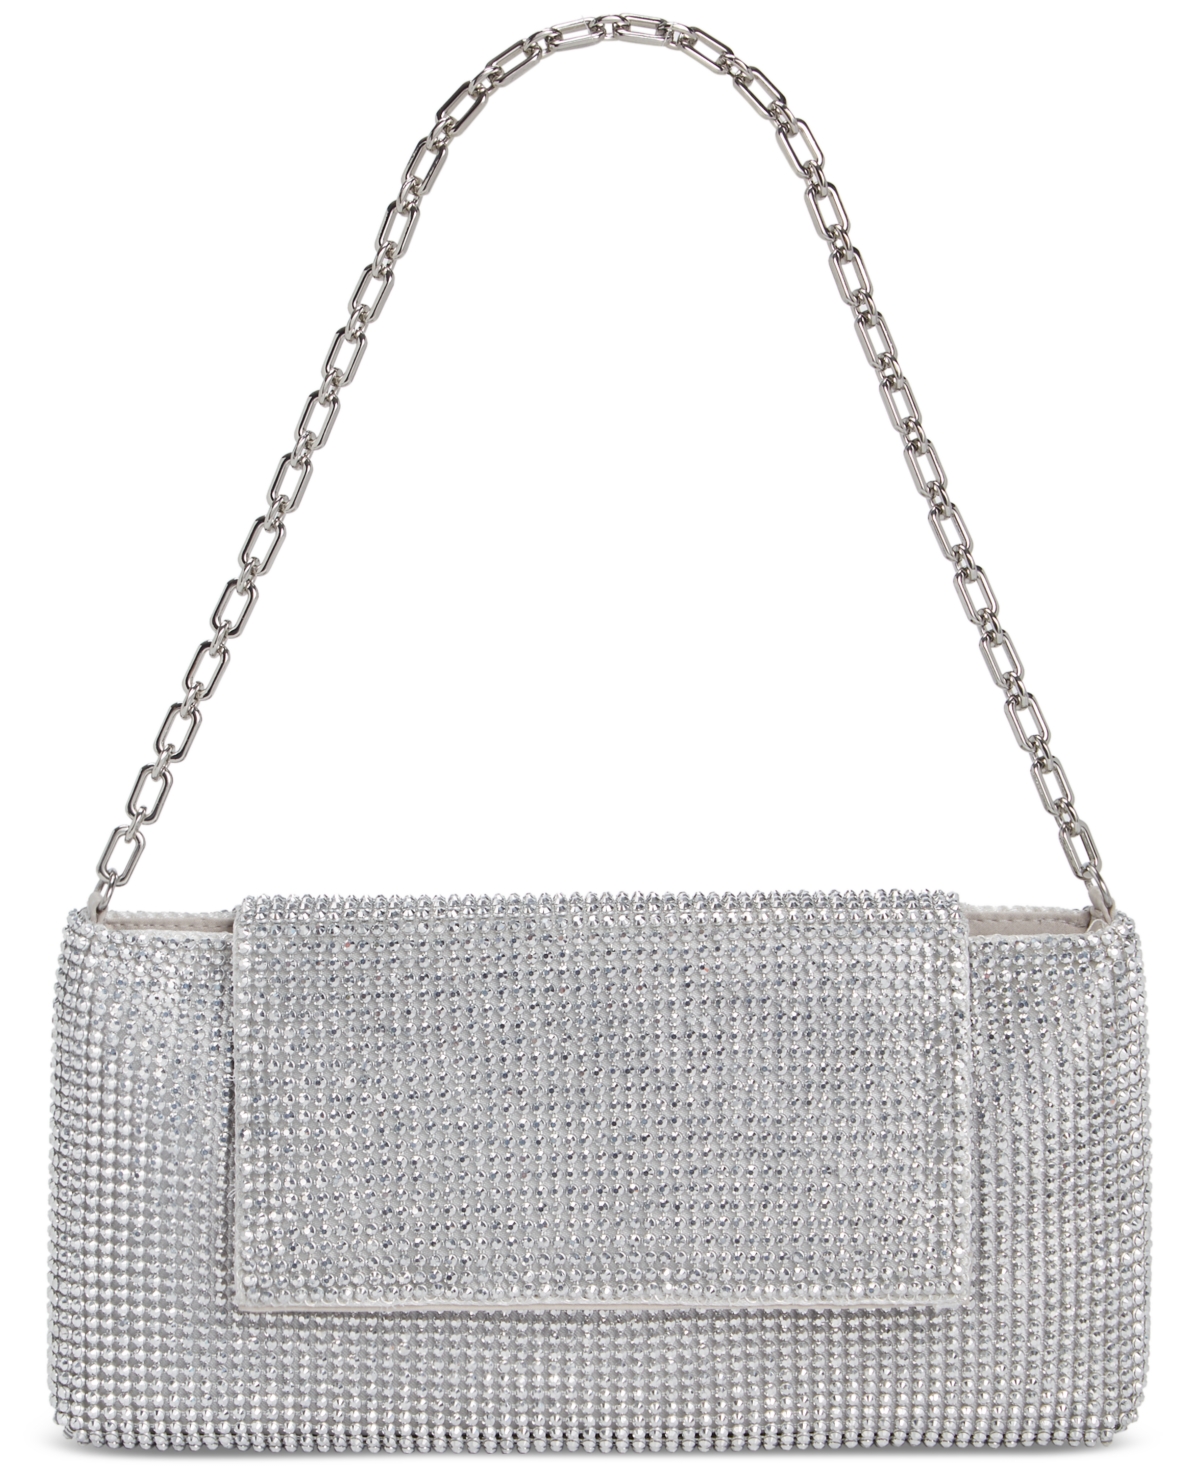 Mesh East West Baguette Bag, Created for Macy's - Silver